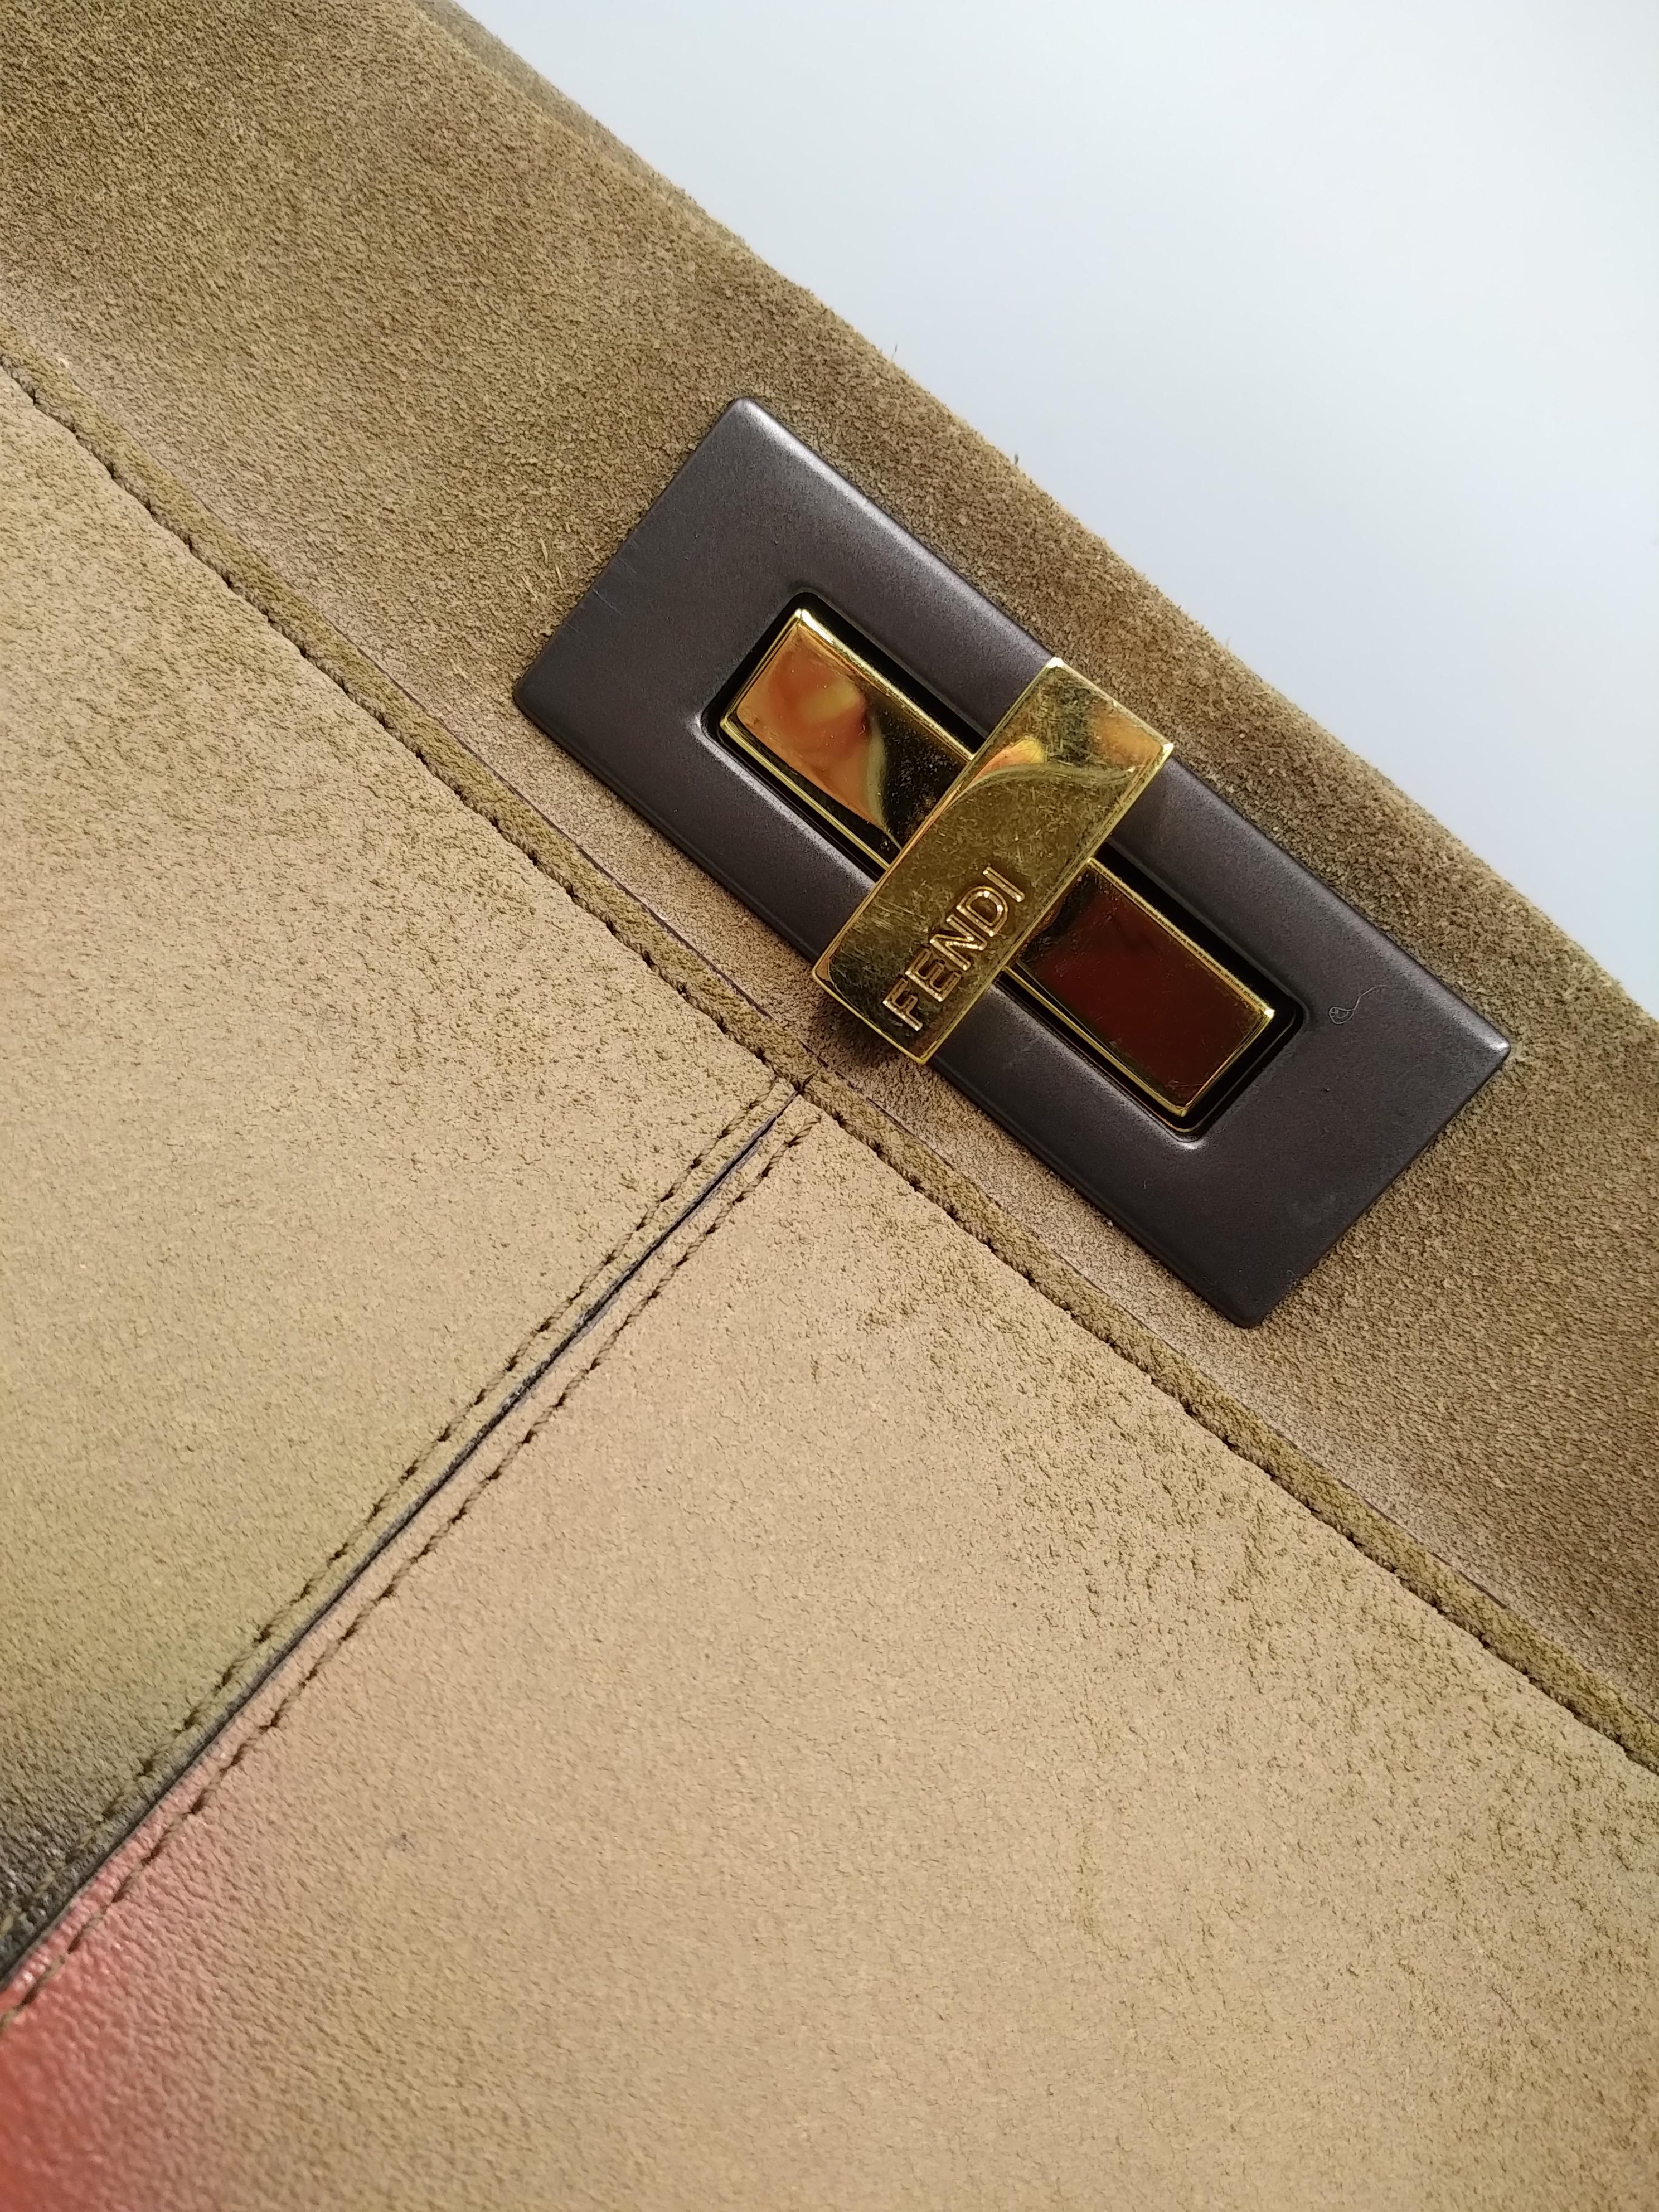 Fendi Brown Suede and Patent Leather Gradient Color rhombus Large Peekaboo Bag, Limited Edition.
- 100% authentic Fendi
- Brown suede with patent leather
- Single flat leather top handle and a removable shoulder strap
- Turn-lock closures on both